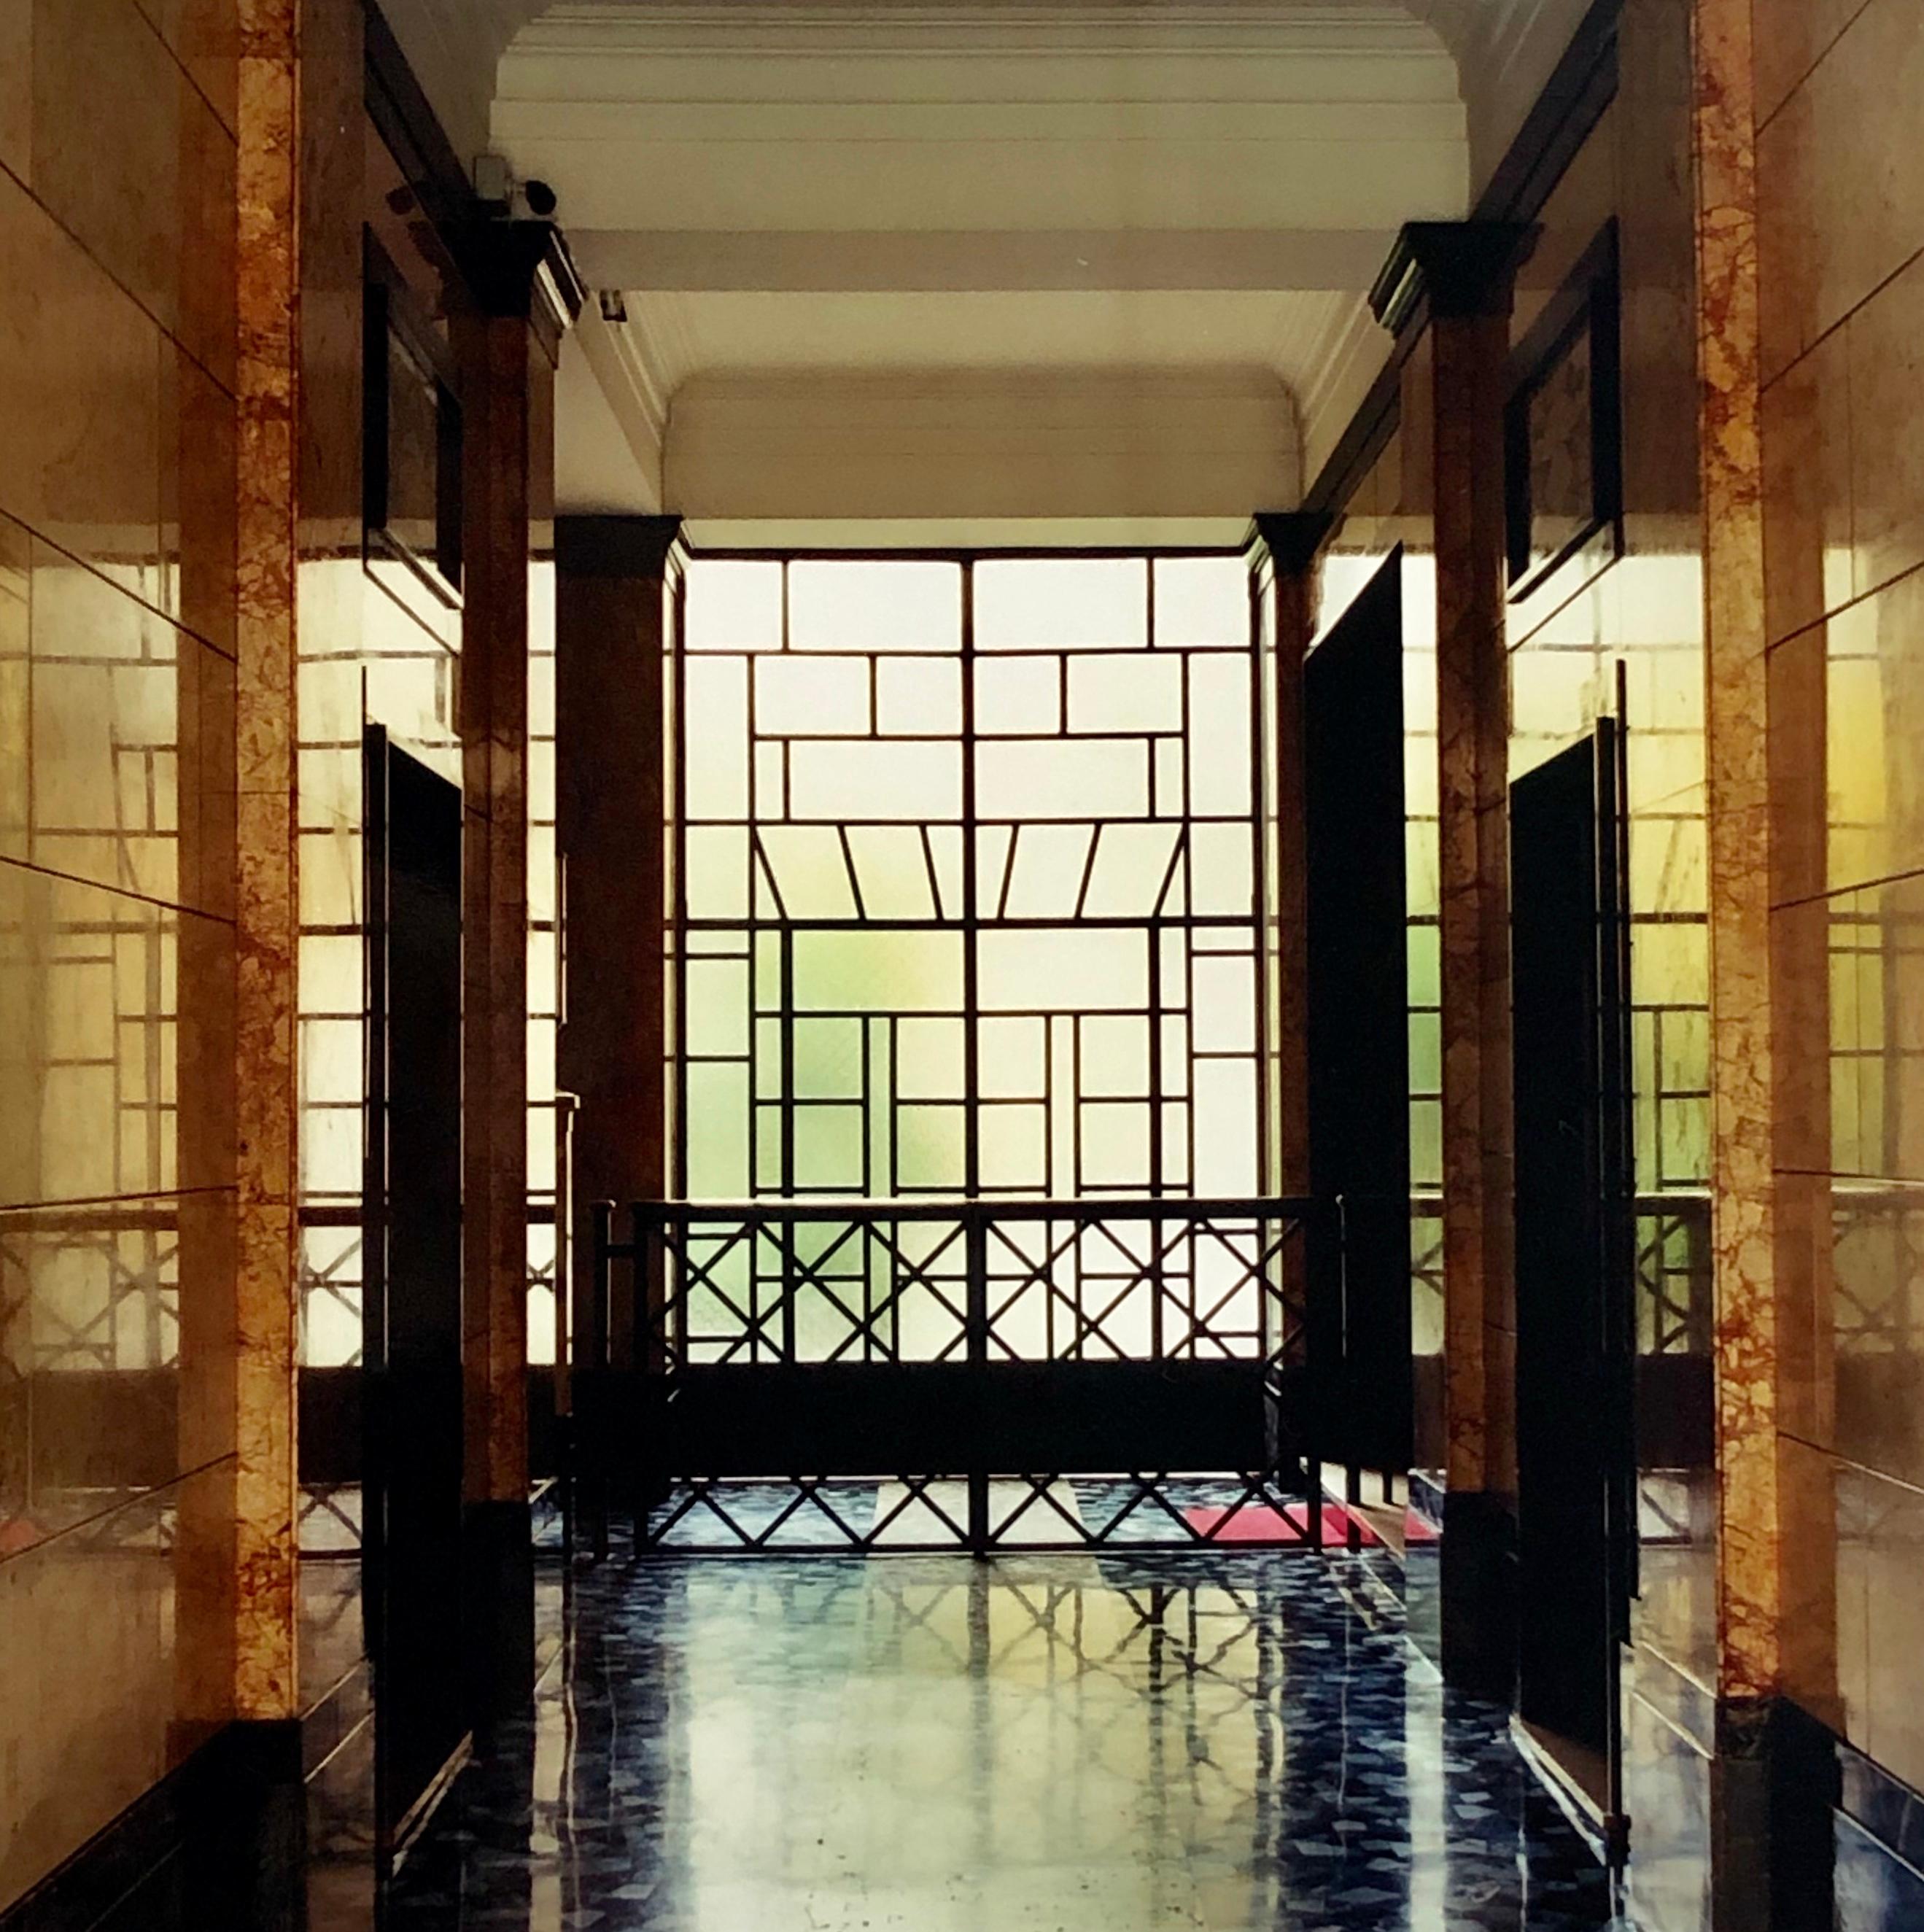 Richard Heeps Color Photograph - Foyer II, Milan - Italian architecture color photography